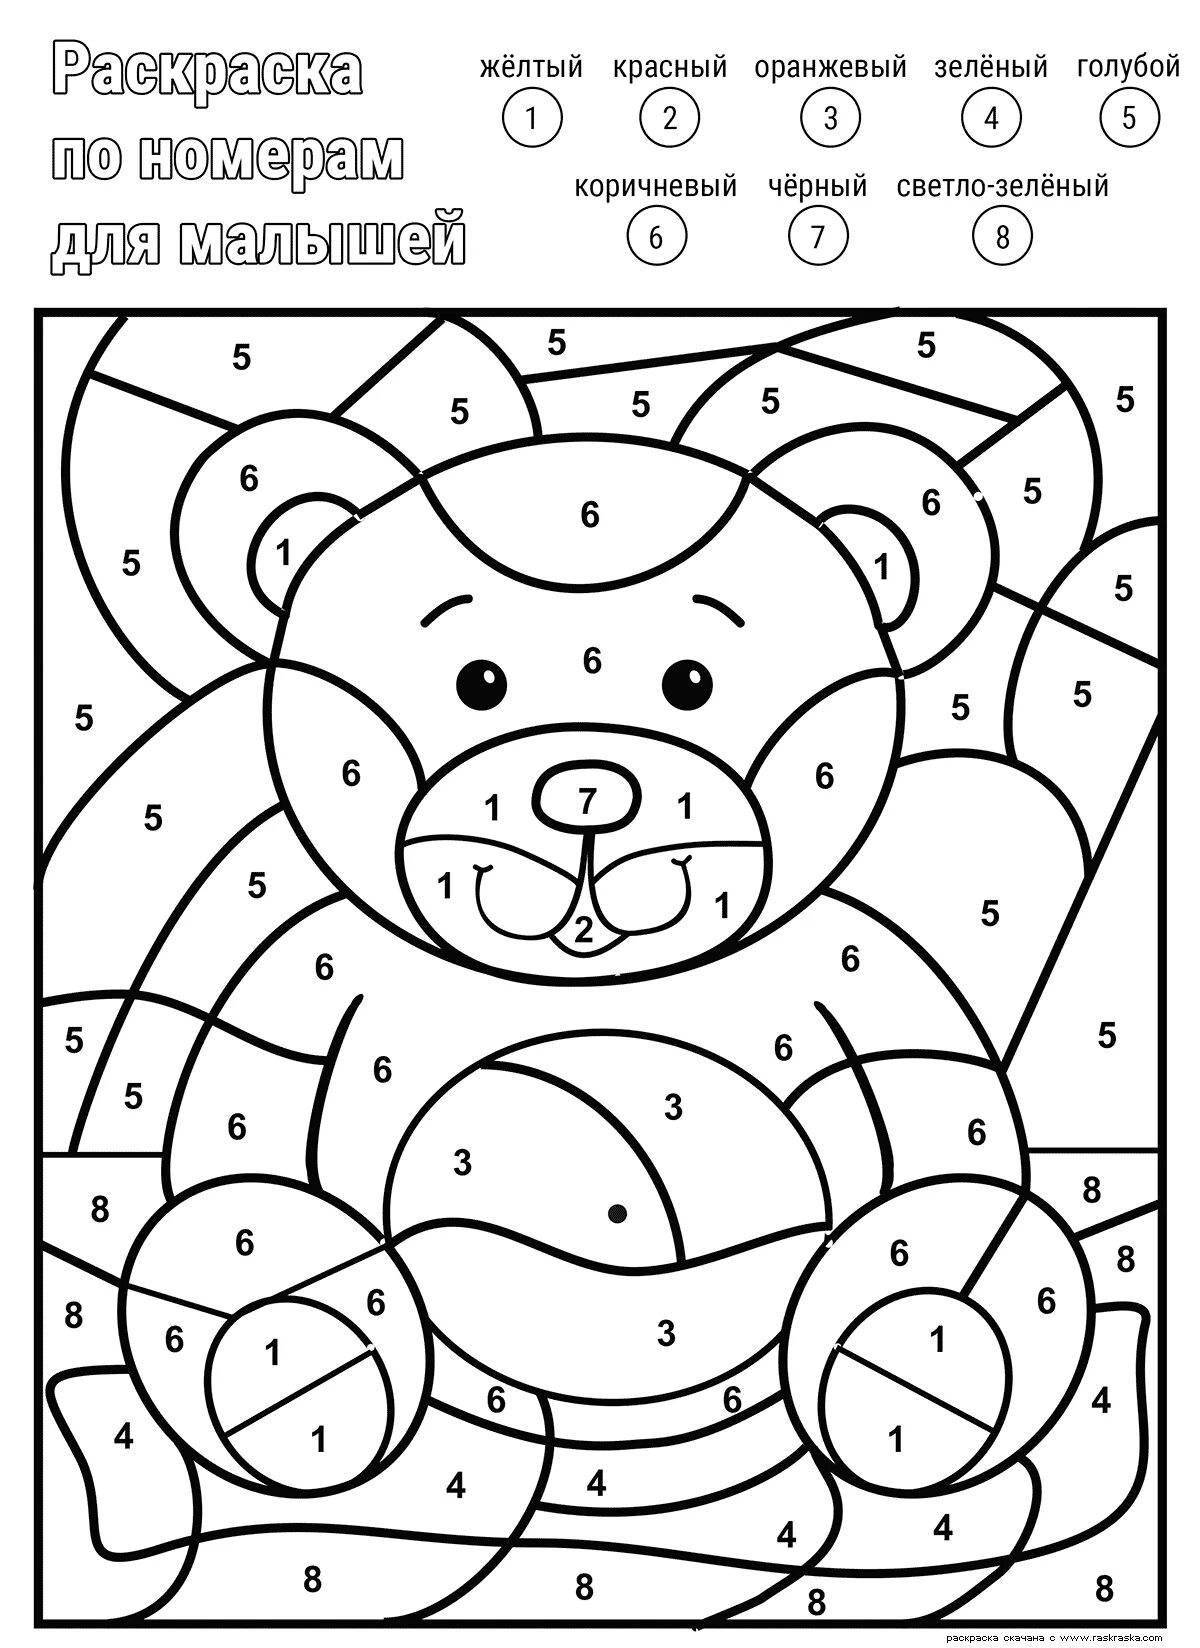 Красочная иллюзия create by numbers coloring page